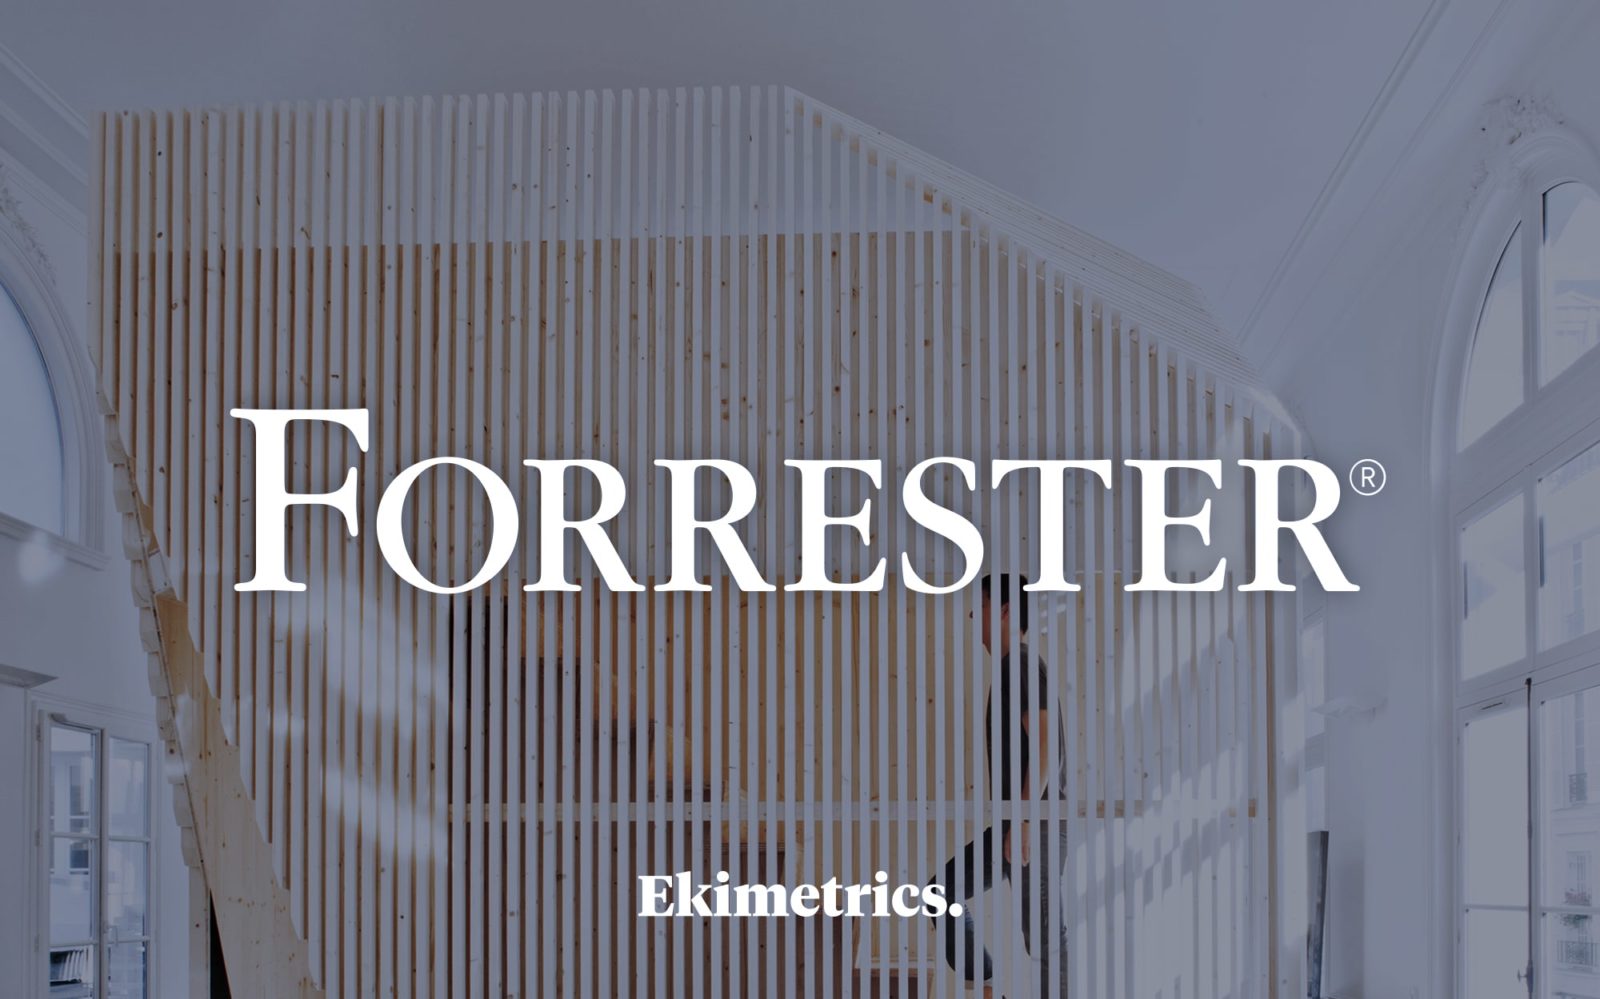 Ekimetrics named a Strong Performer in the Forrester Wave™